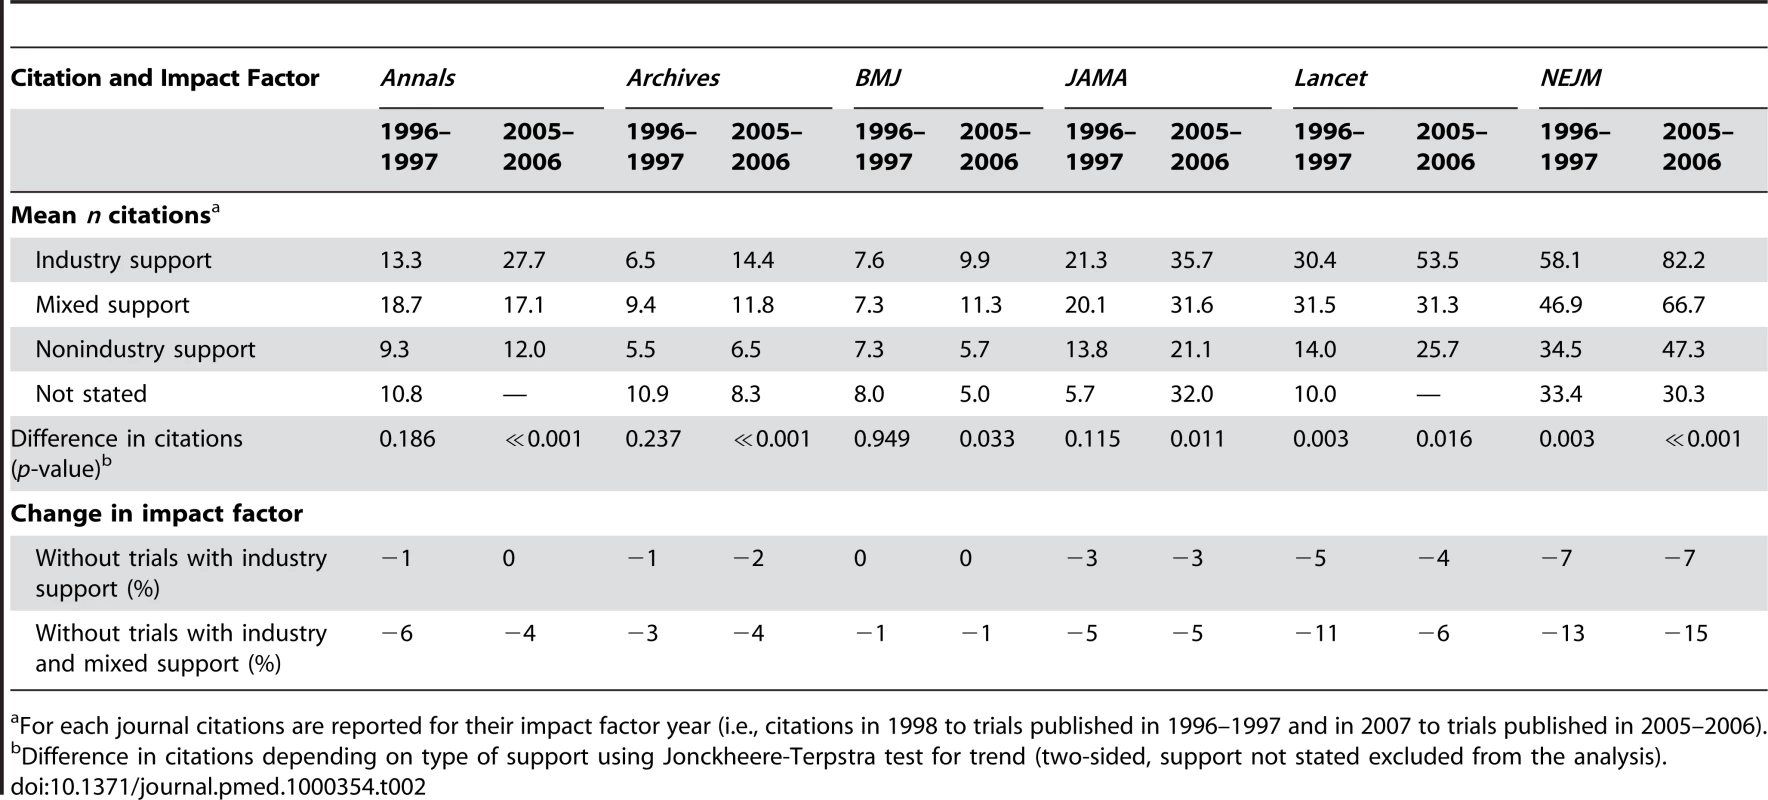 Citations for randomised trials published in major general medical journals and change in impact factors when industry-supported trials are excluded.